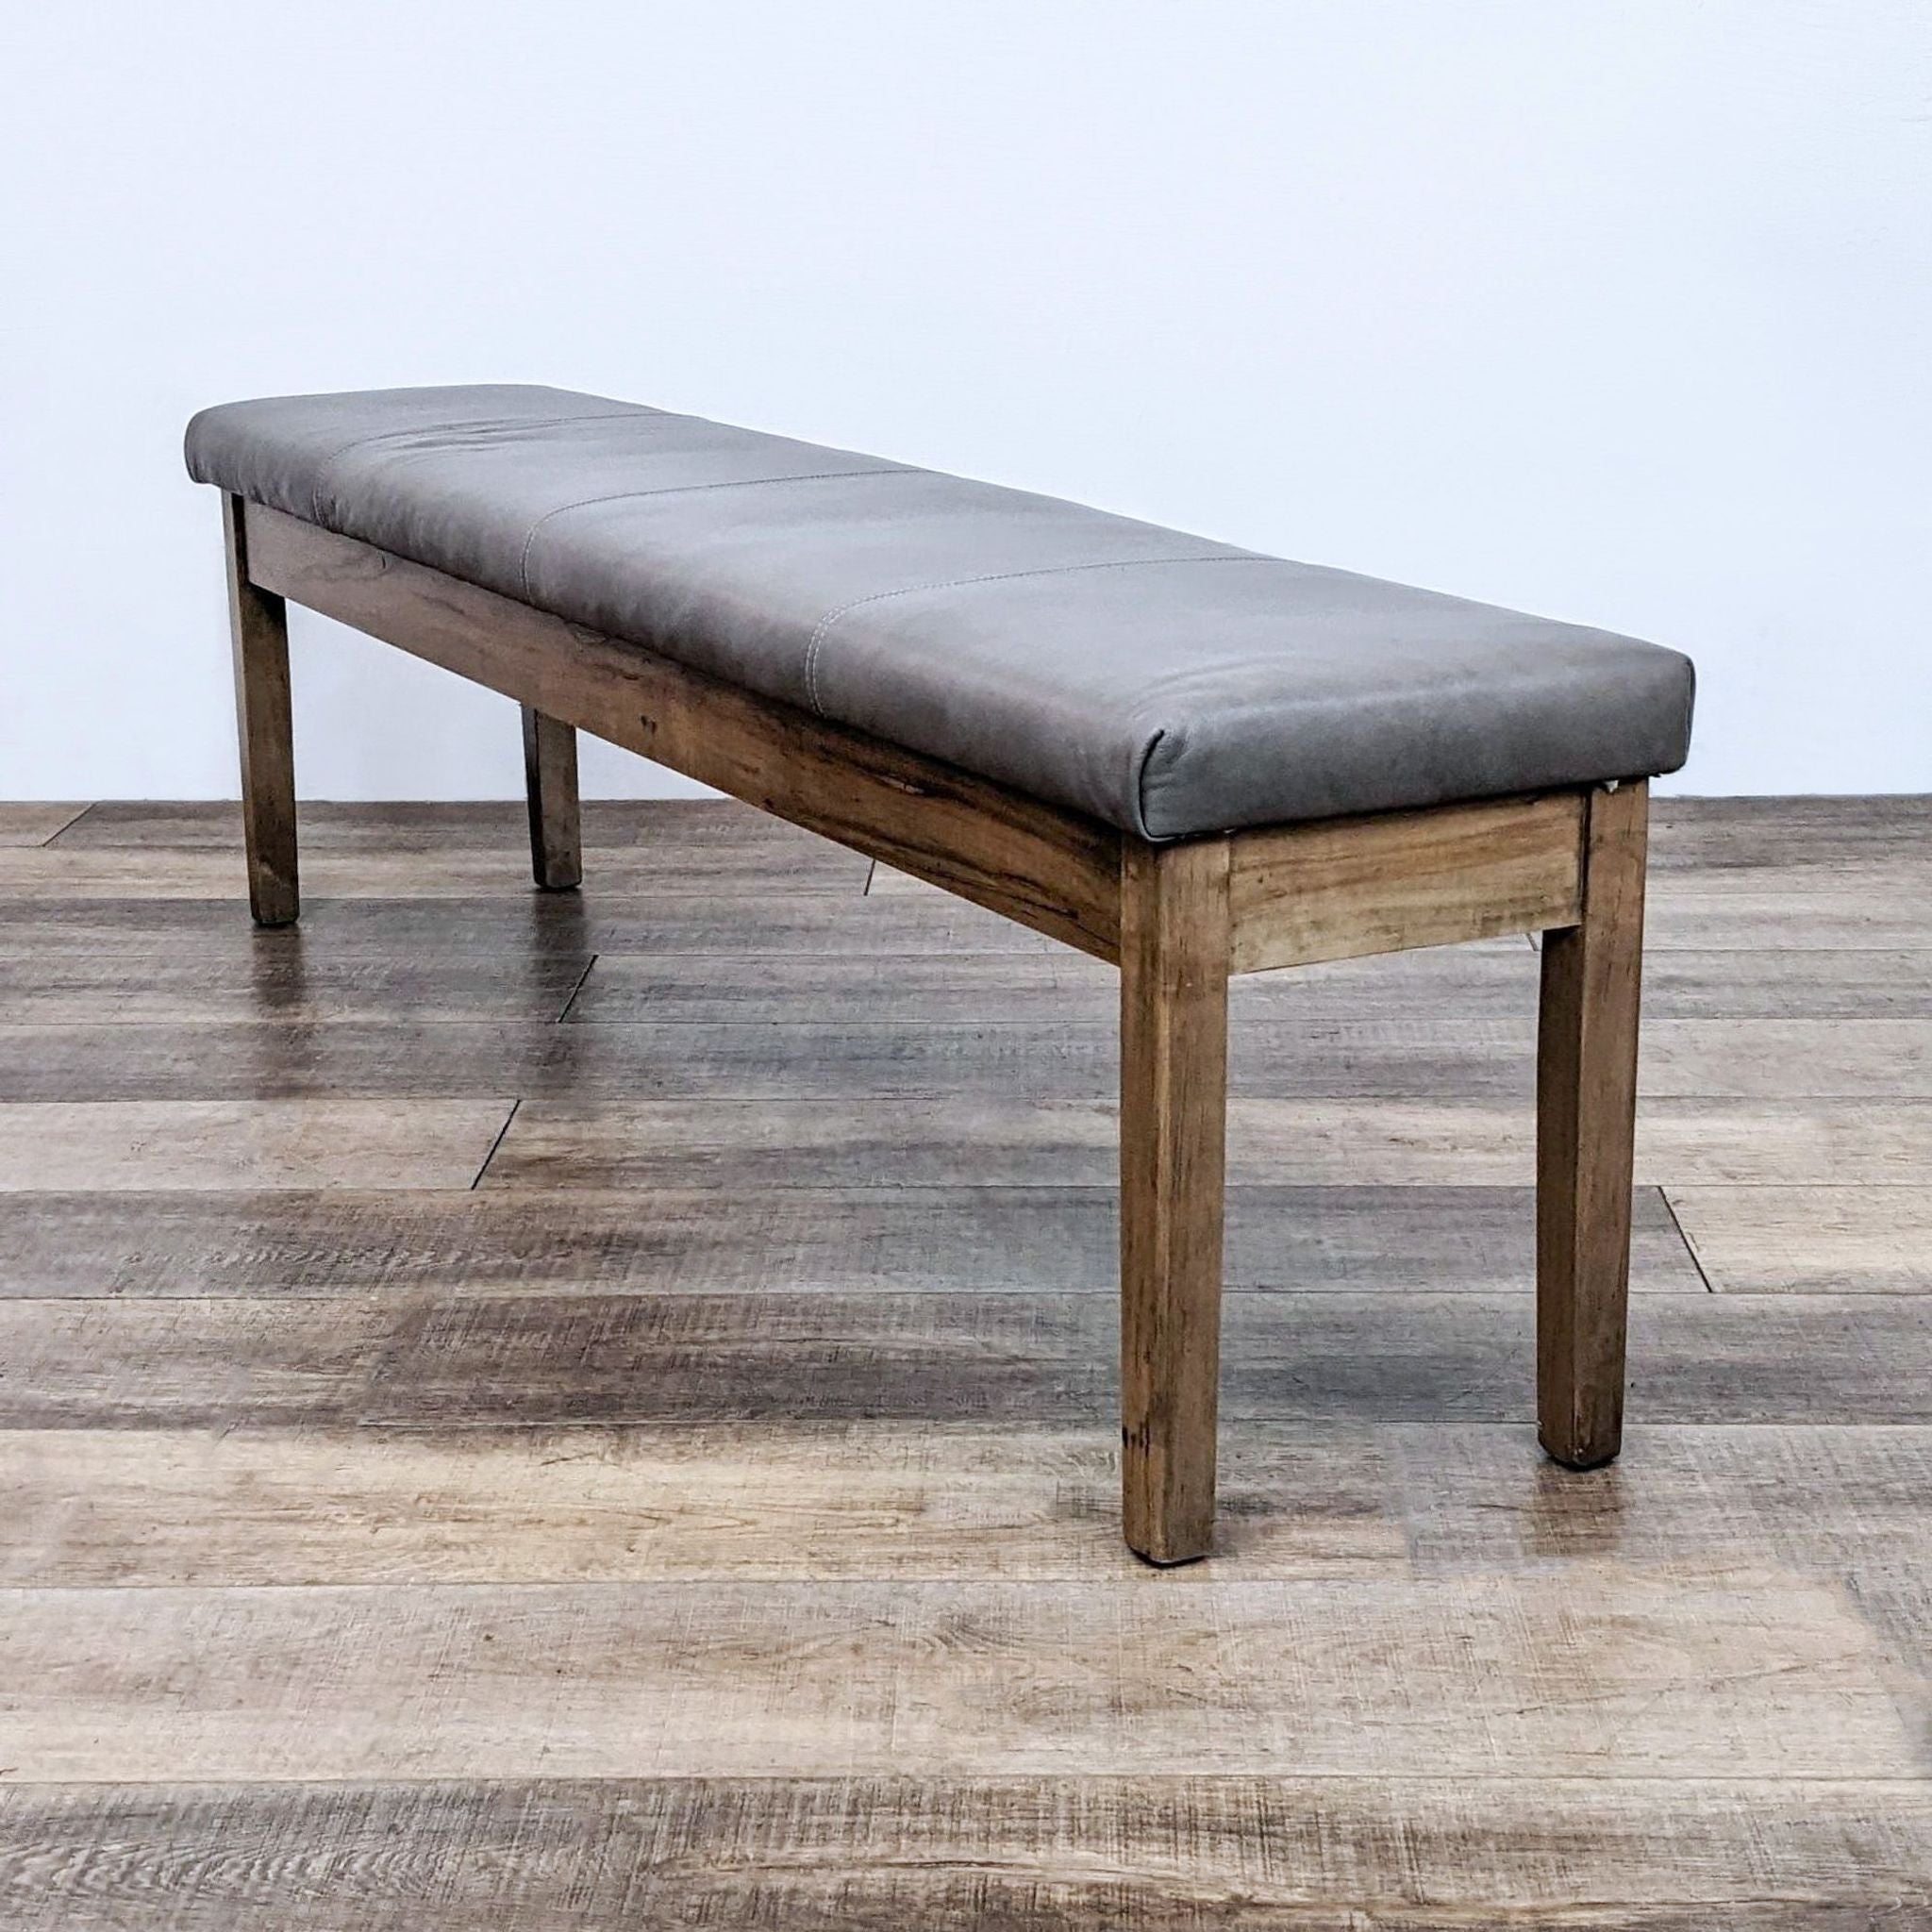 Alt text 2: A long, solid wood bench with a cushioned faux-leather seat by Bassett, positioned against a wooden floor backdrop.